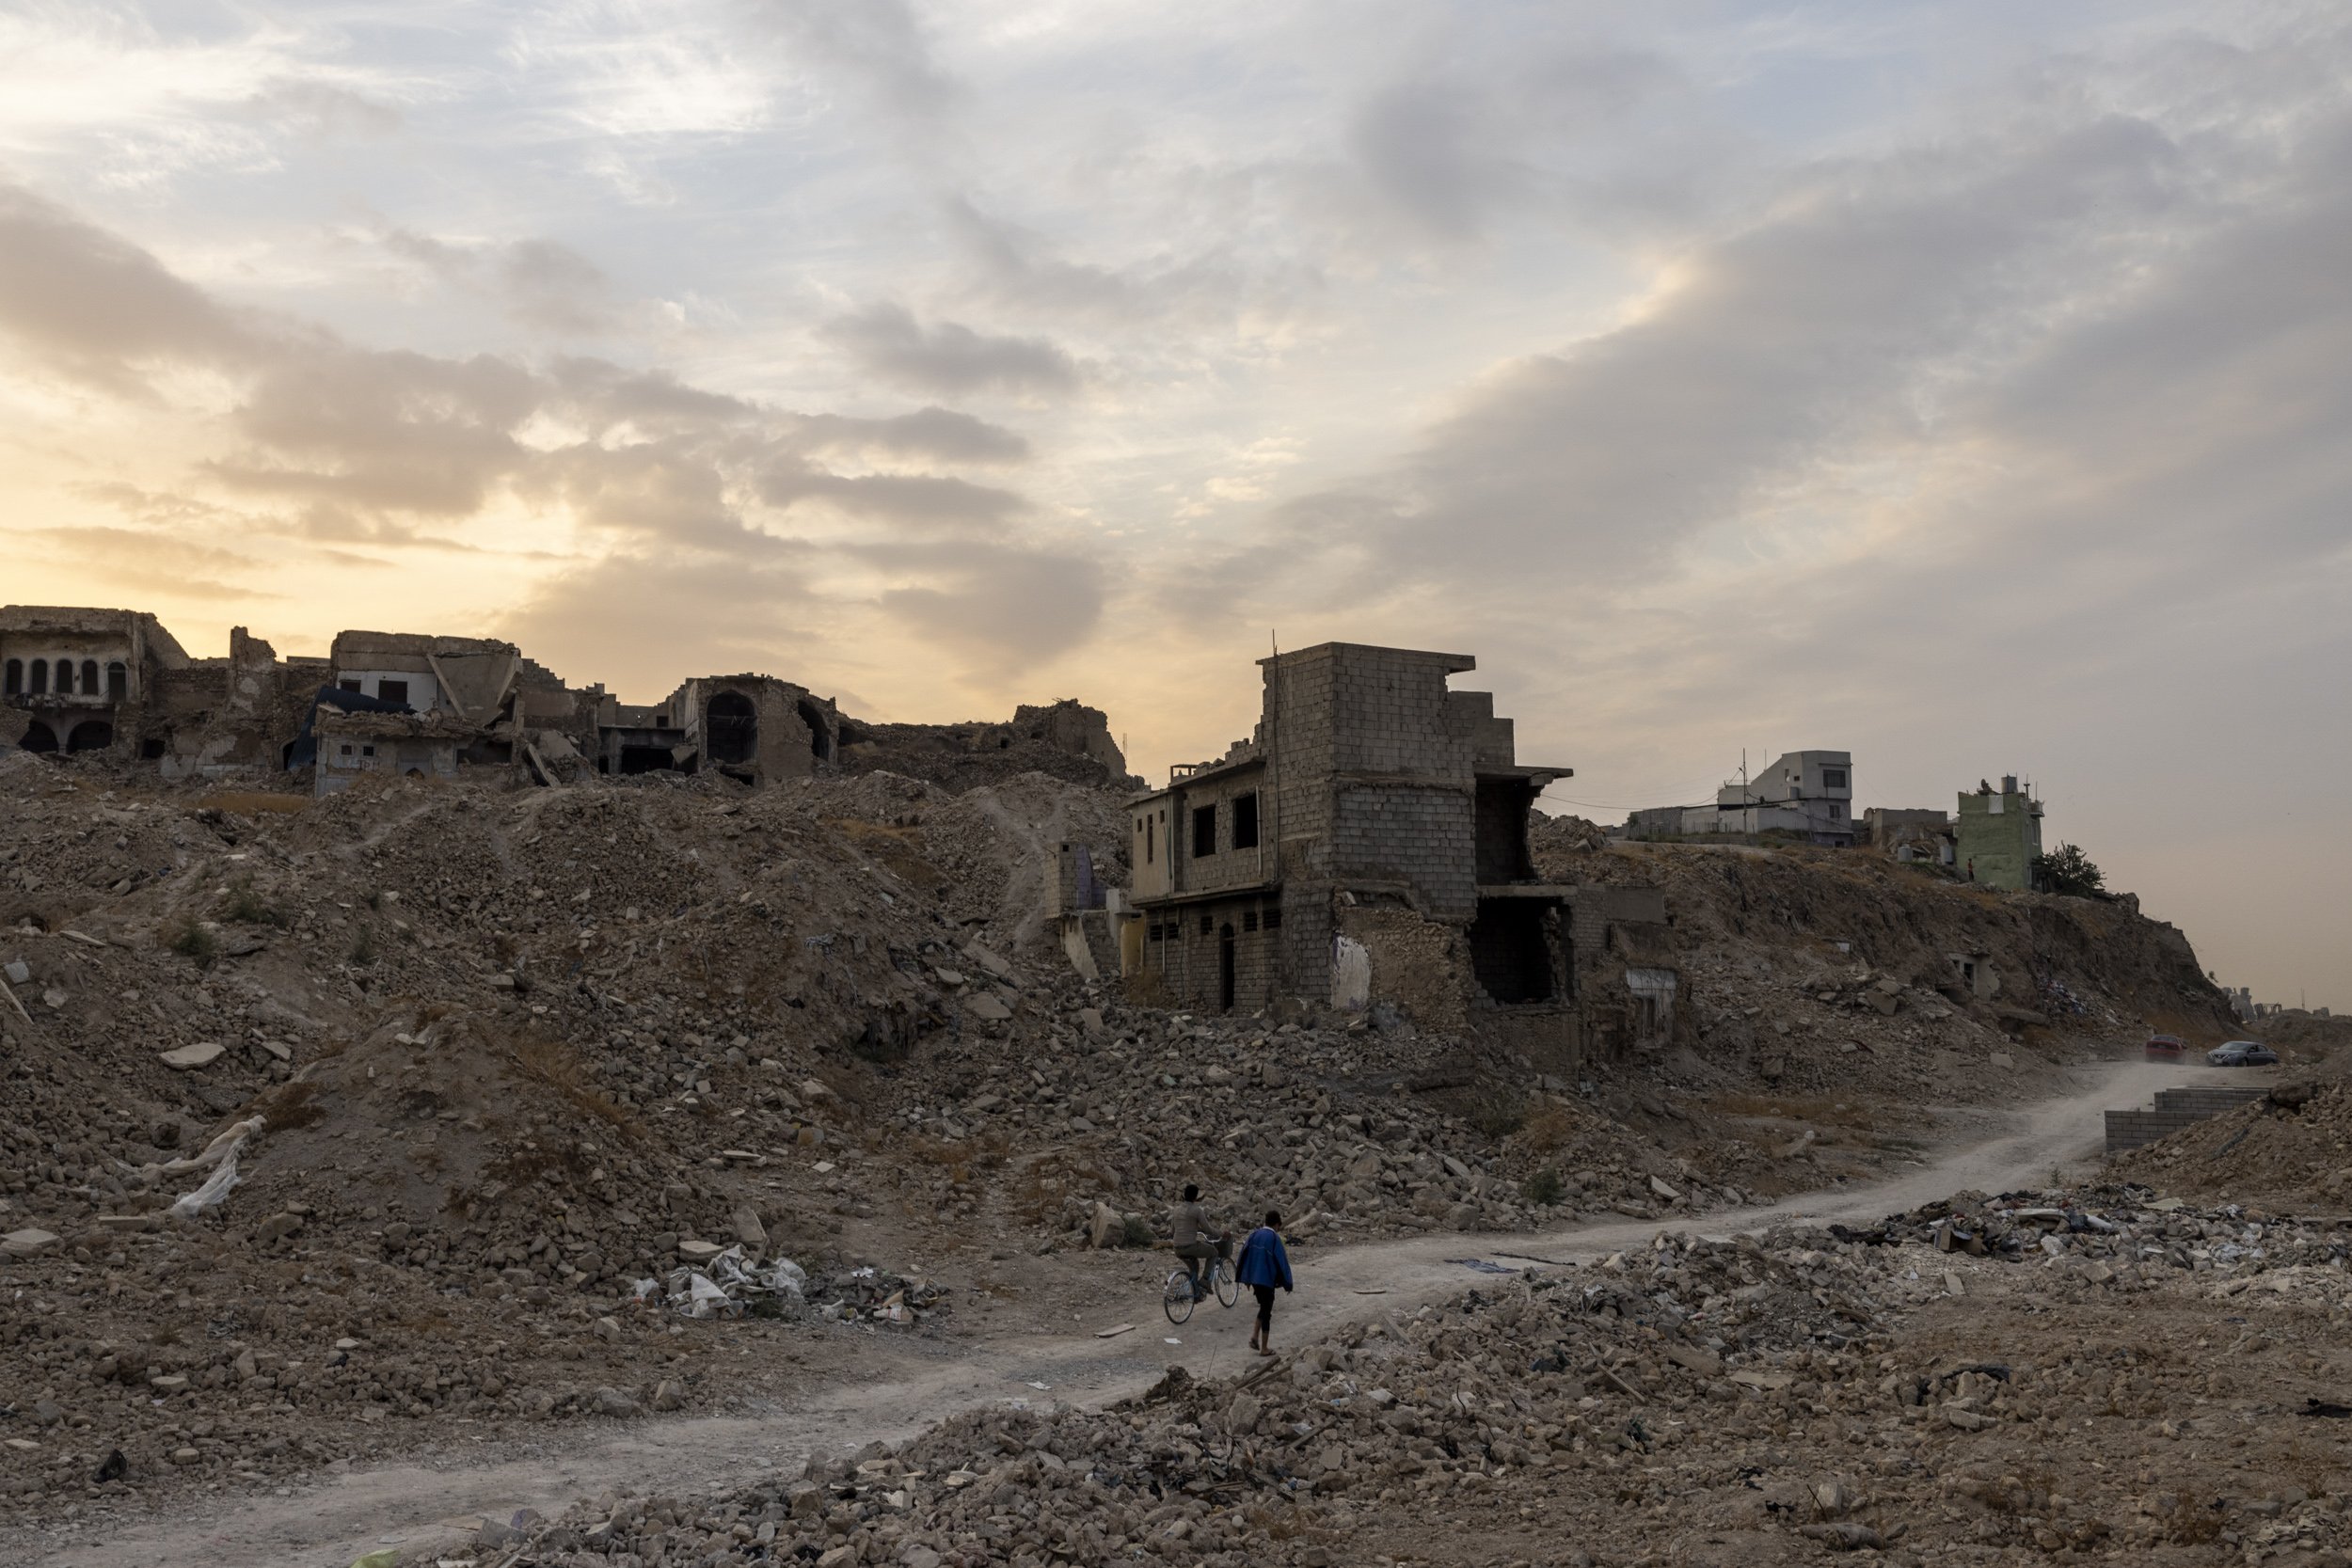    The Maydan district in the ‘Old City’ of Mosul, where ISIS made their last stand, was the most heavily destroyed part of the city and to this day remains in ruins.  